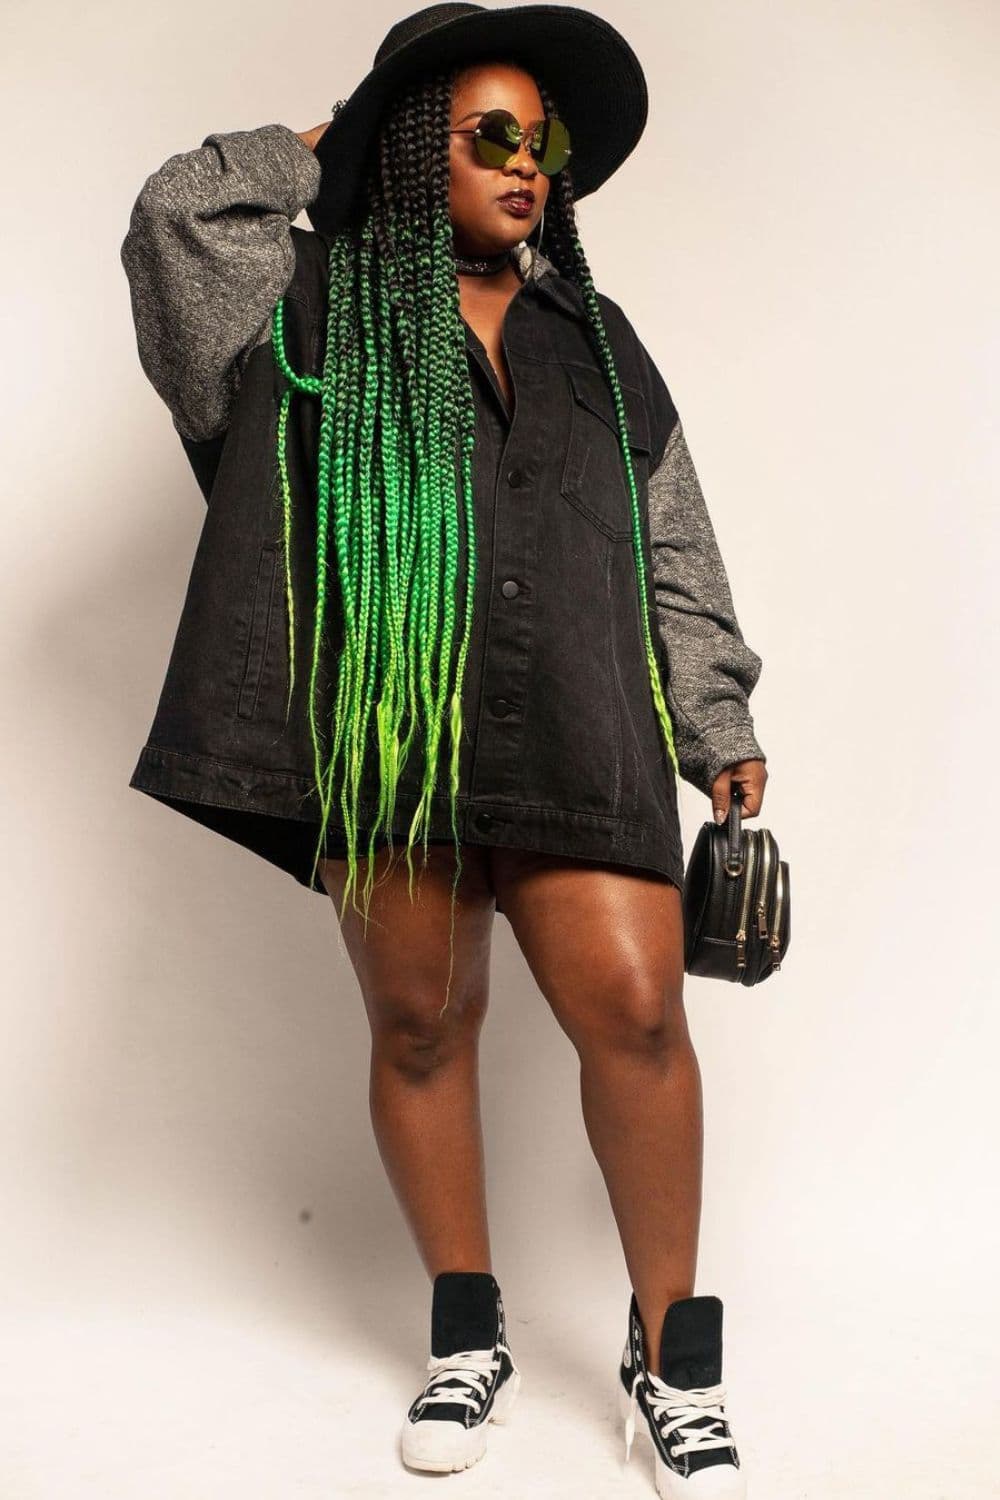 A woman wearing a black and gray jacket, a black hat, sunglasses, black Converge shoes and with shades of green knotless braids.